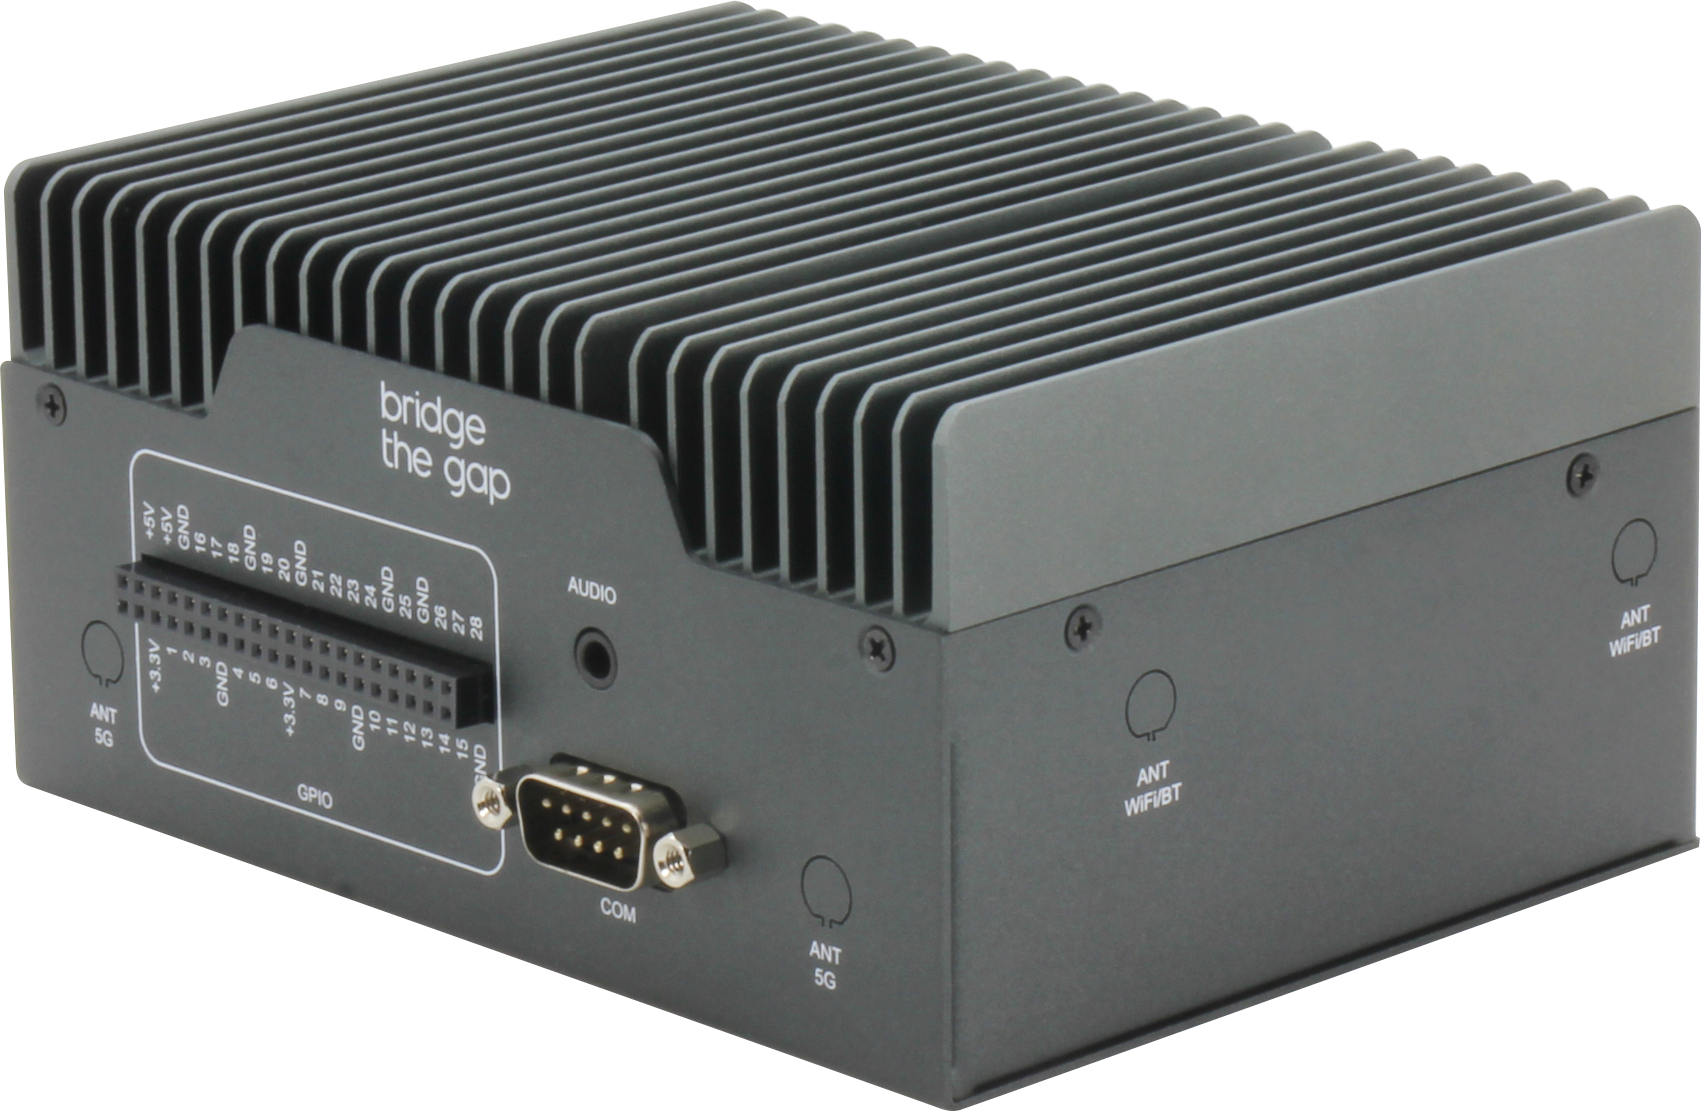 AAEON Announce the World’s First Fanless Mini PC with Intel Core i3 Processor N-series